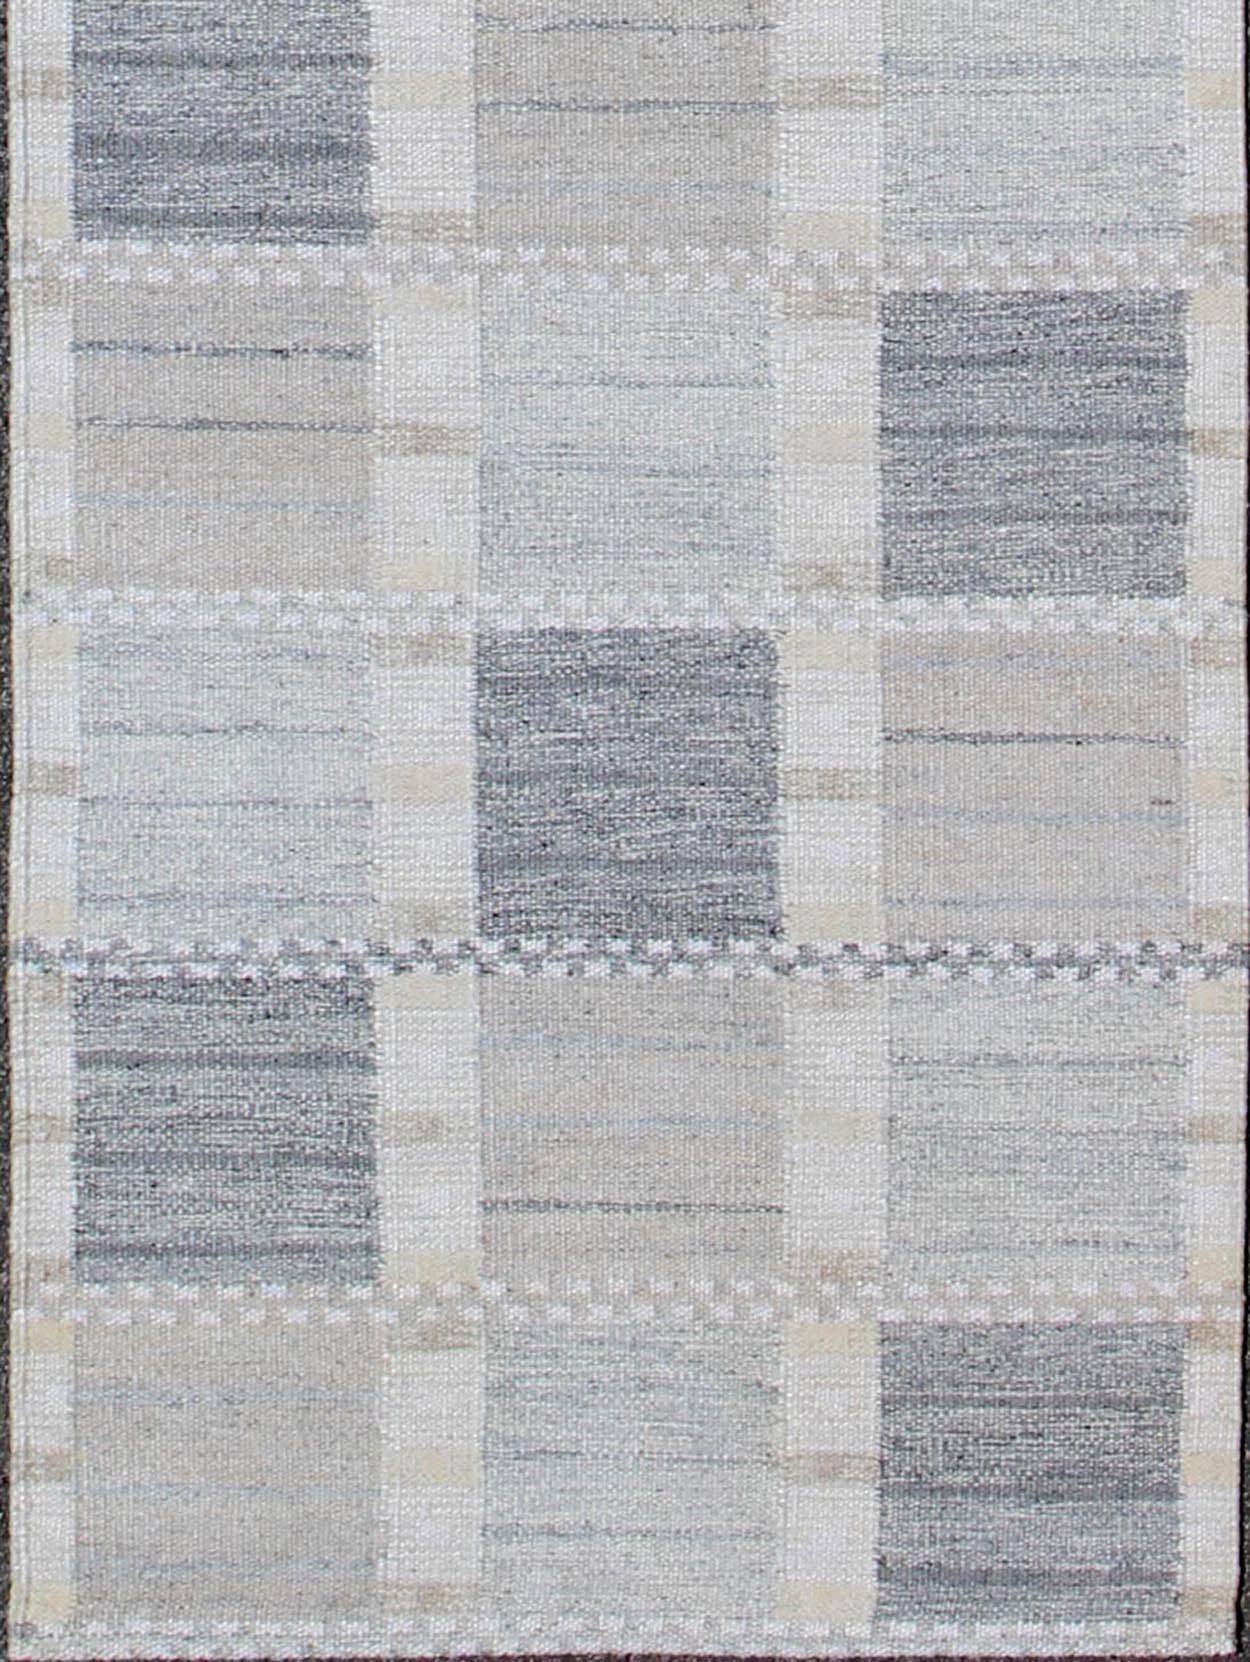 Long modern geometric runner in grey, cream, ivory, and faint taupe, rug rjk-16048-shb-022-04, country of origin / type: Western Europe / Scandinavian, 2018

This Scandinavian patterned rug is inspired by the work of Swedish textile designers of